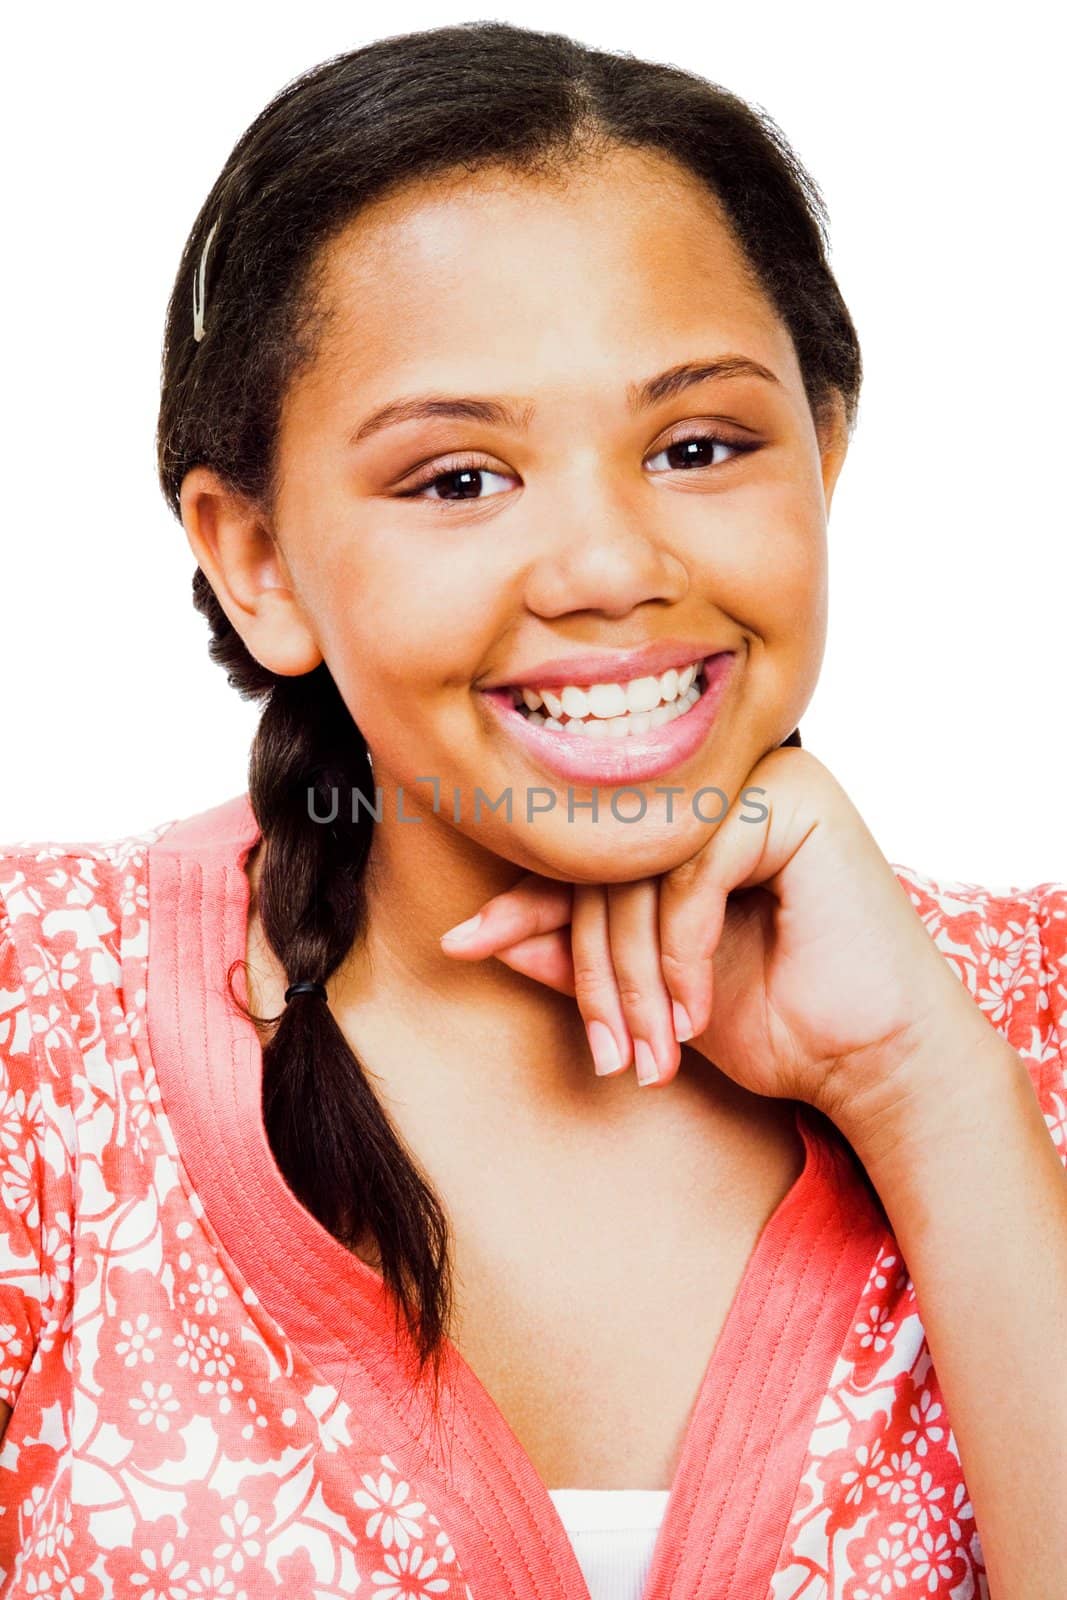 Teenage girl smiling with her hand on chin isolated over white